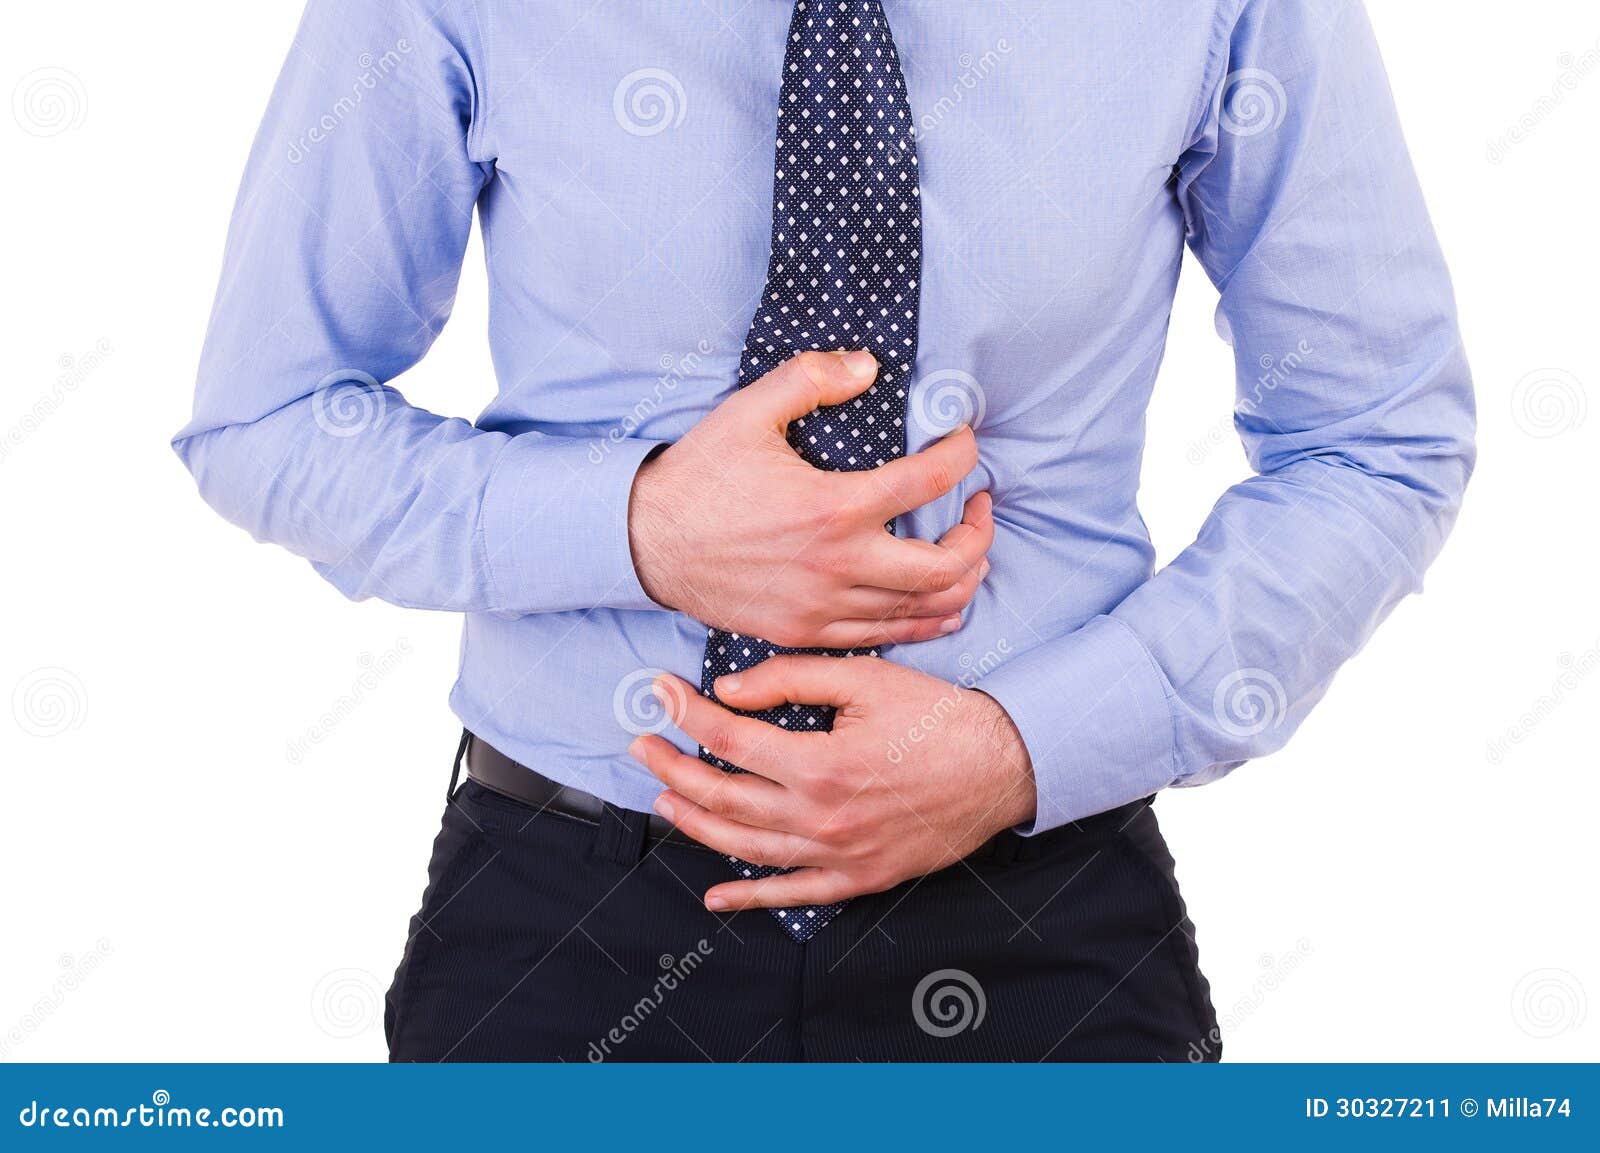 Businessman Suffering From Stomach Pain Stock Image Image Of Ache